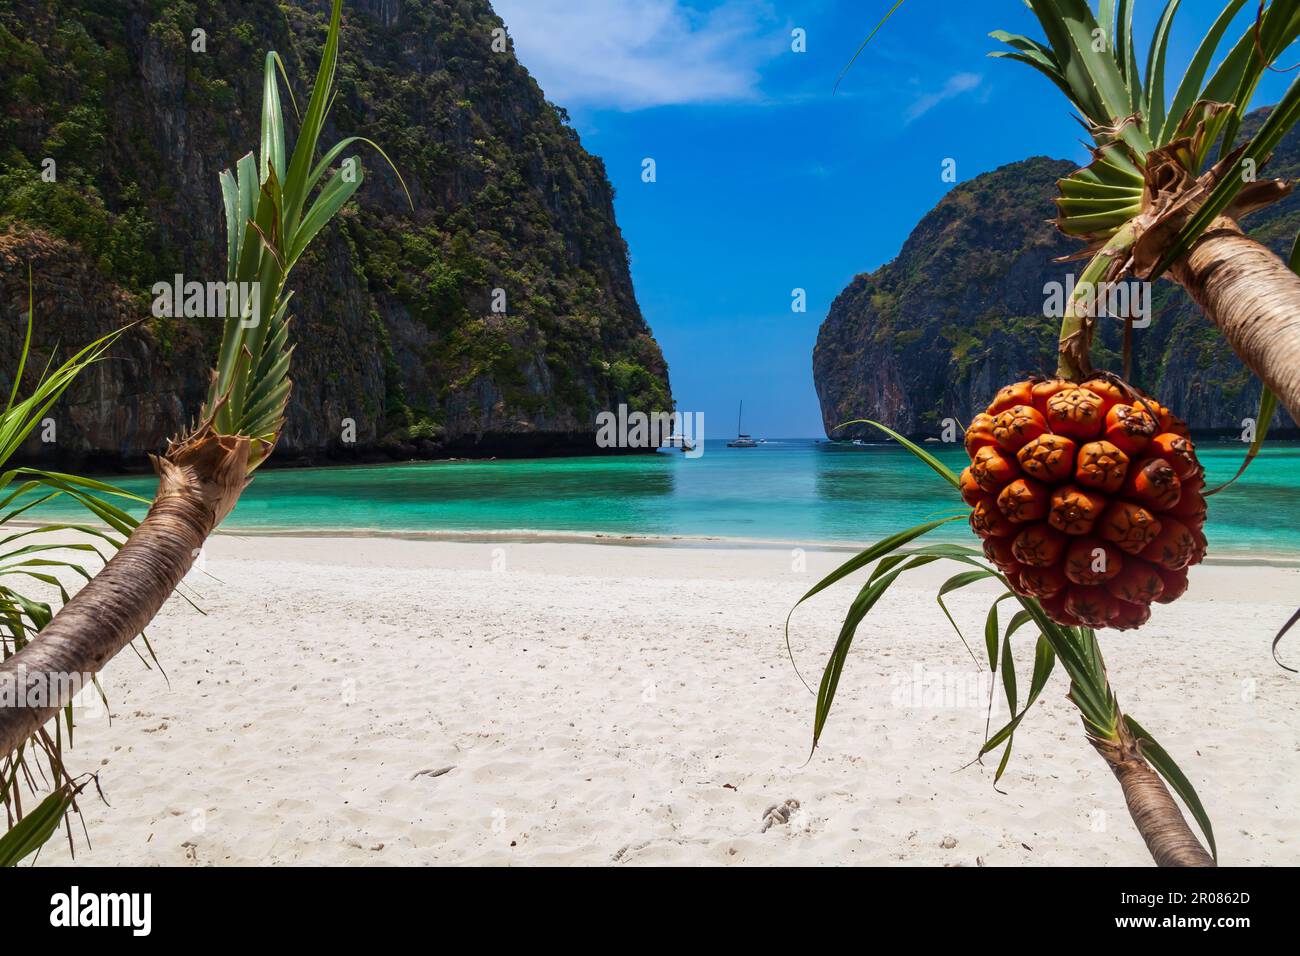 The legendary Maya Bay beach without people with a beautiful beach of sand, clear turquoise water and close uo view on fruit palm pandan tectorius. UN Stock Photo